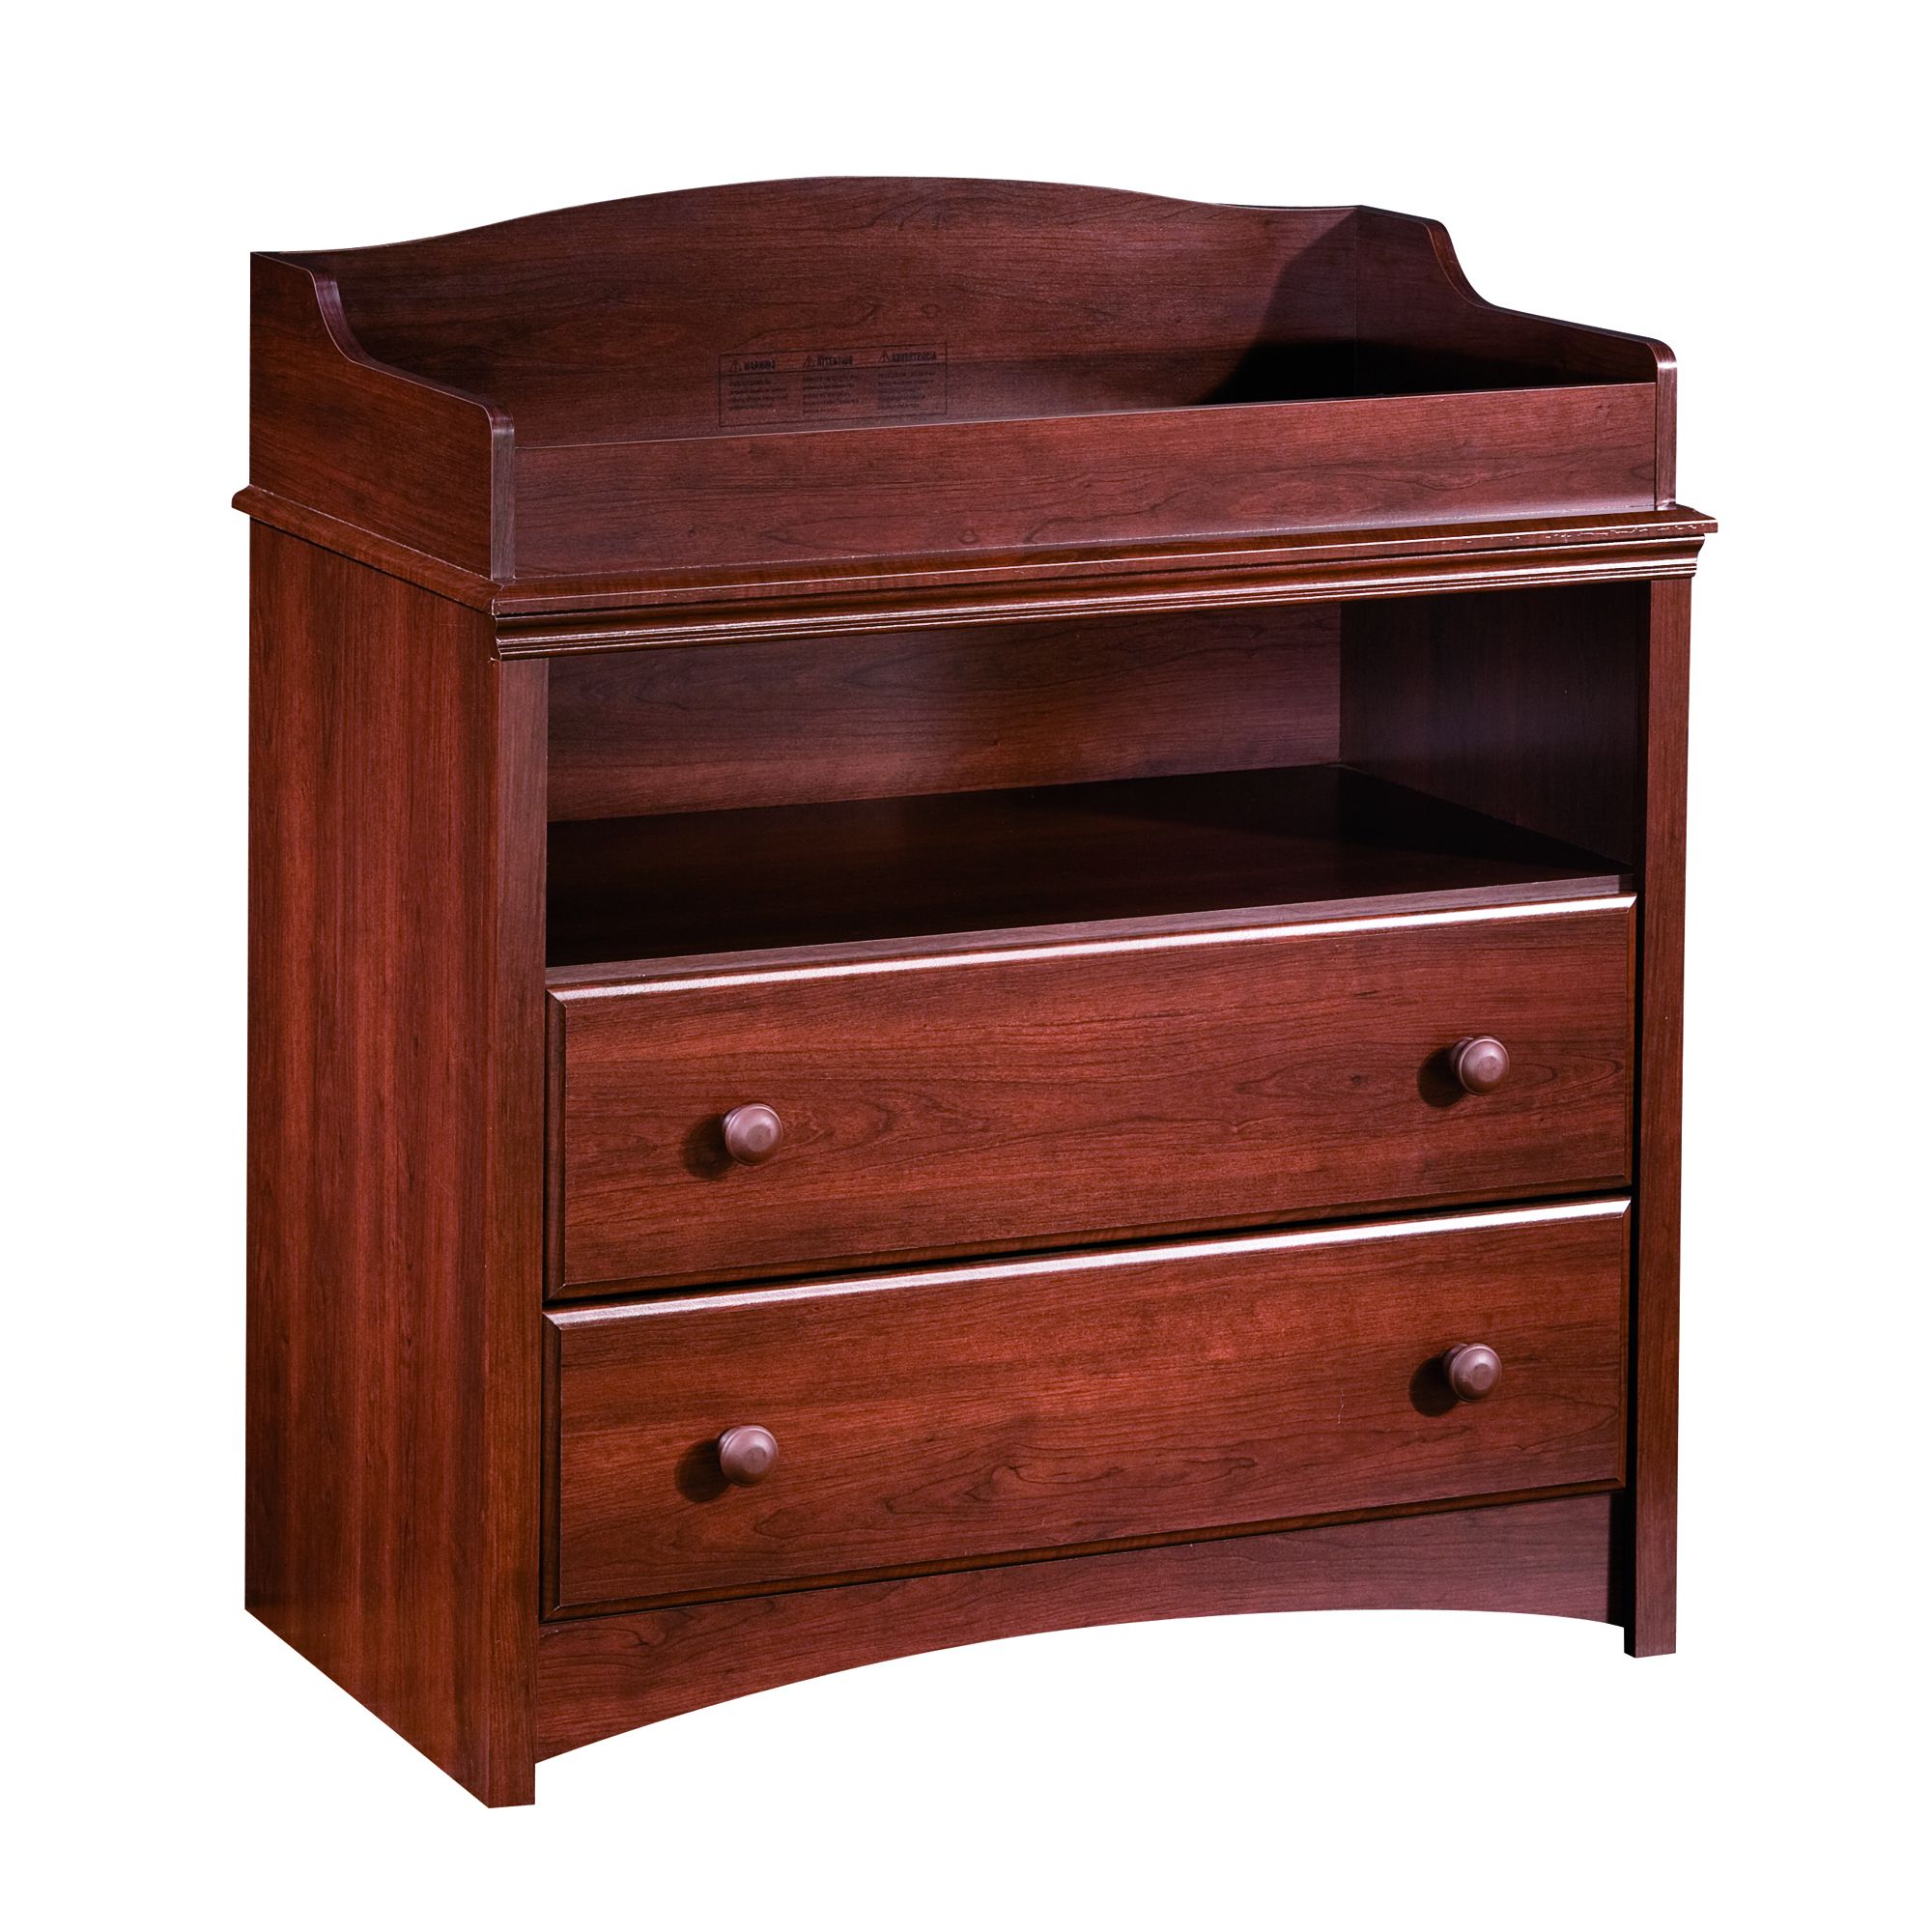 South Shore Sweet Morning Wood Changing Table in Royal Cherry Finish - image 1 of 6